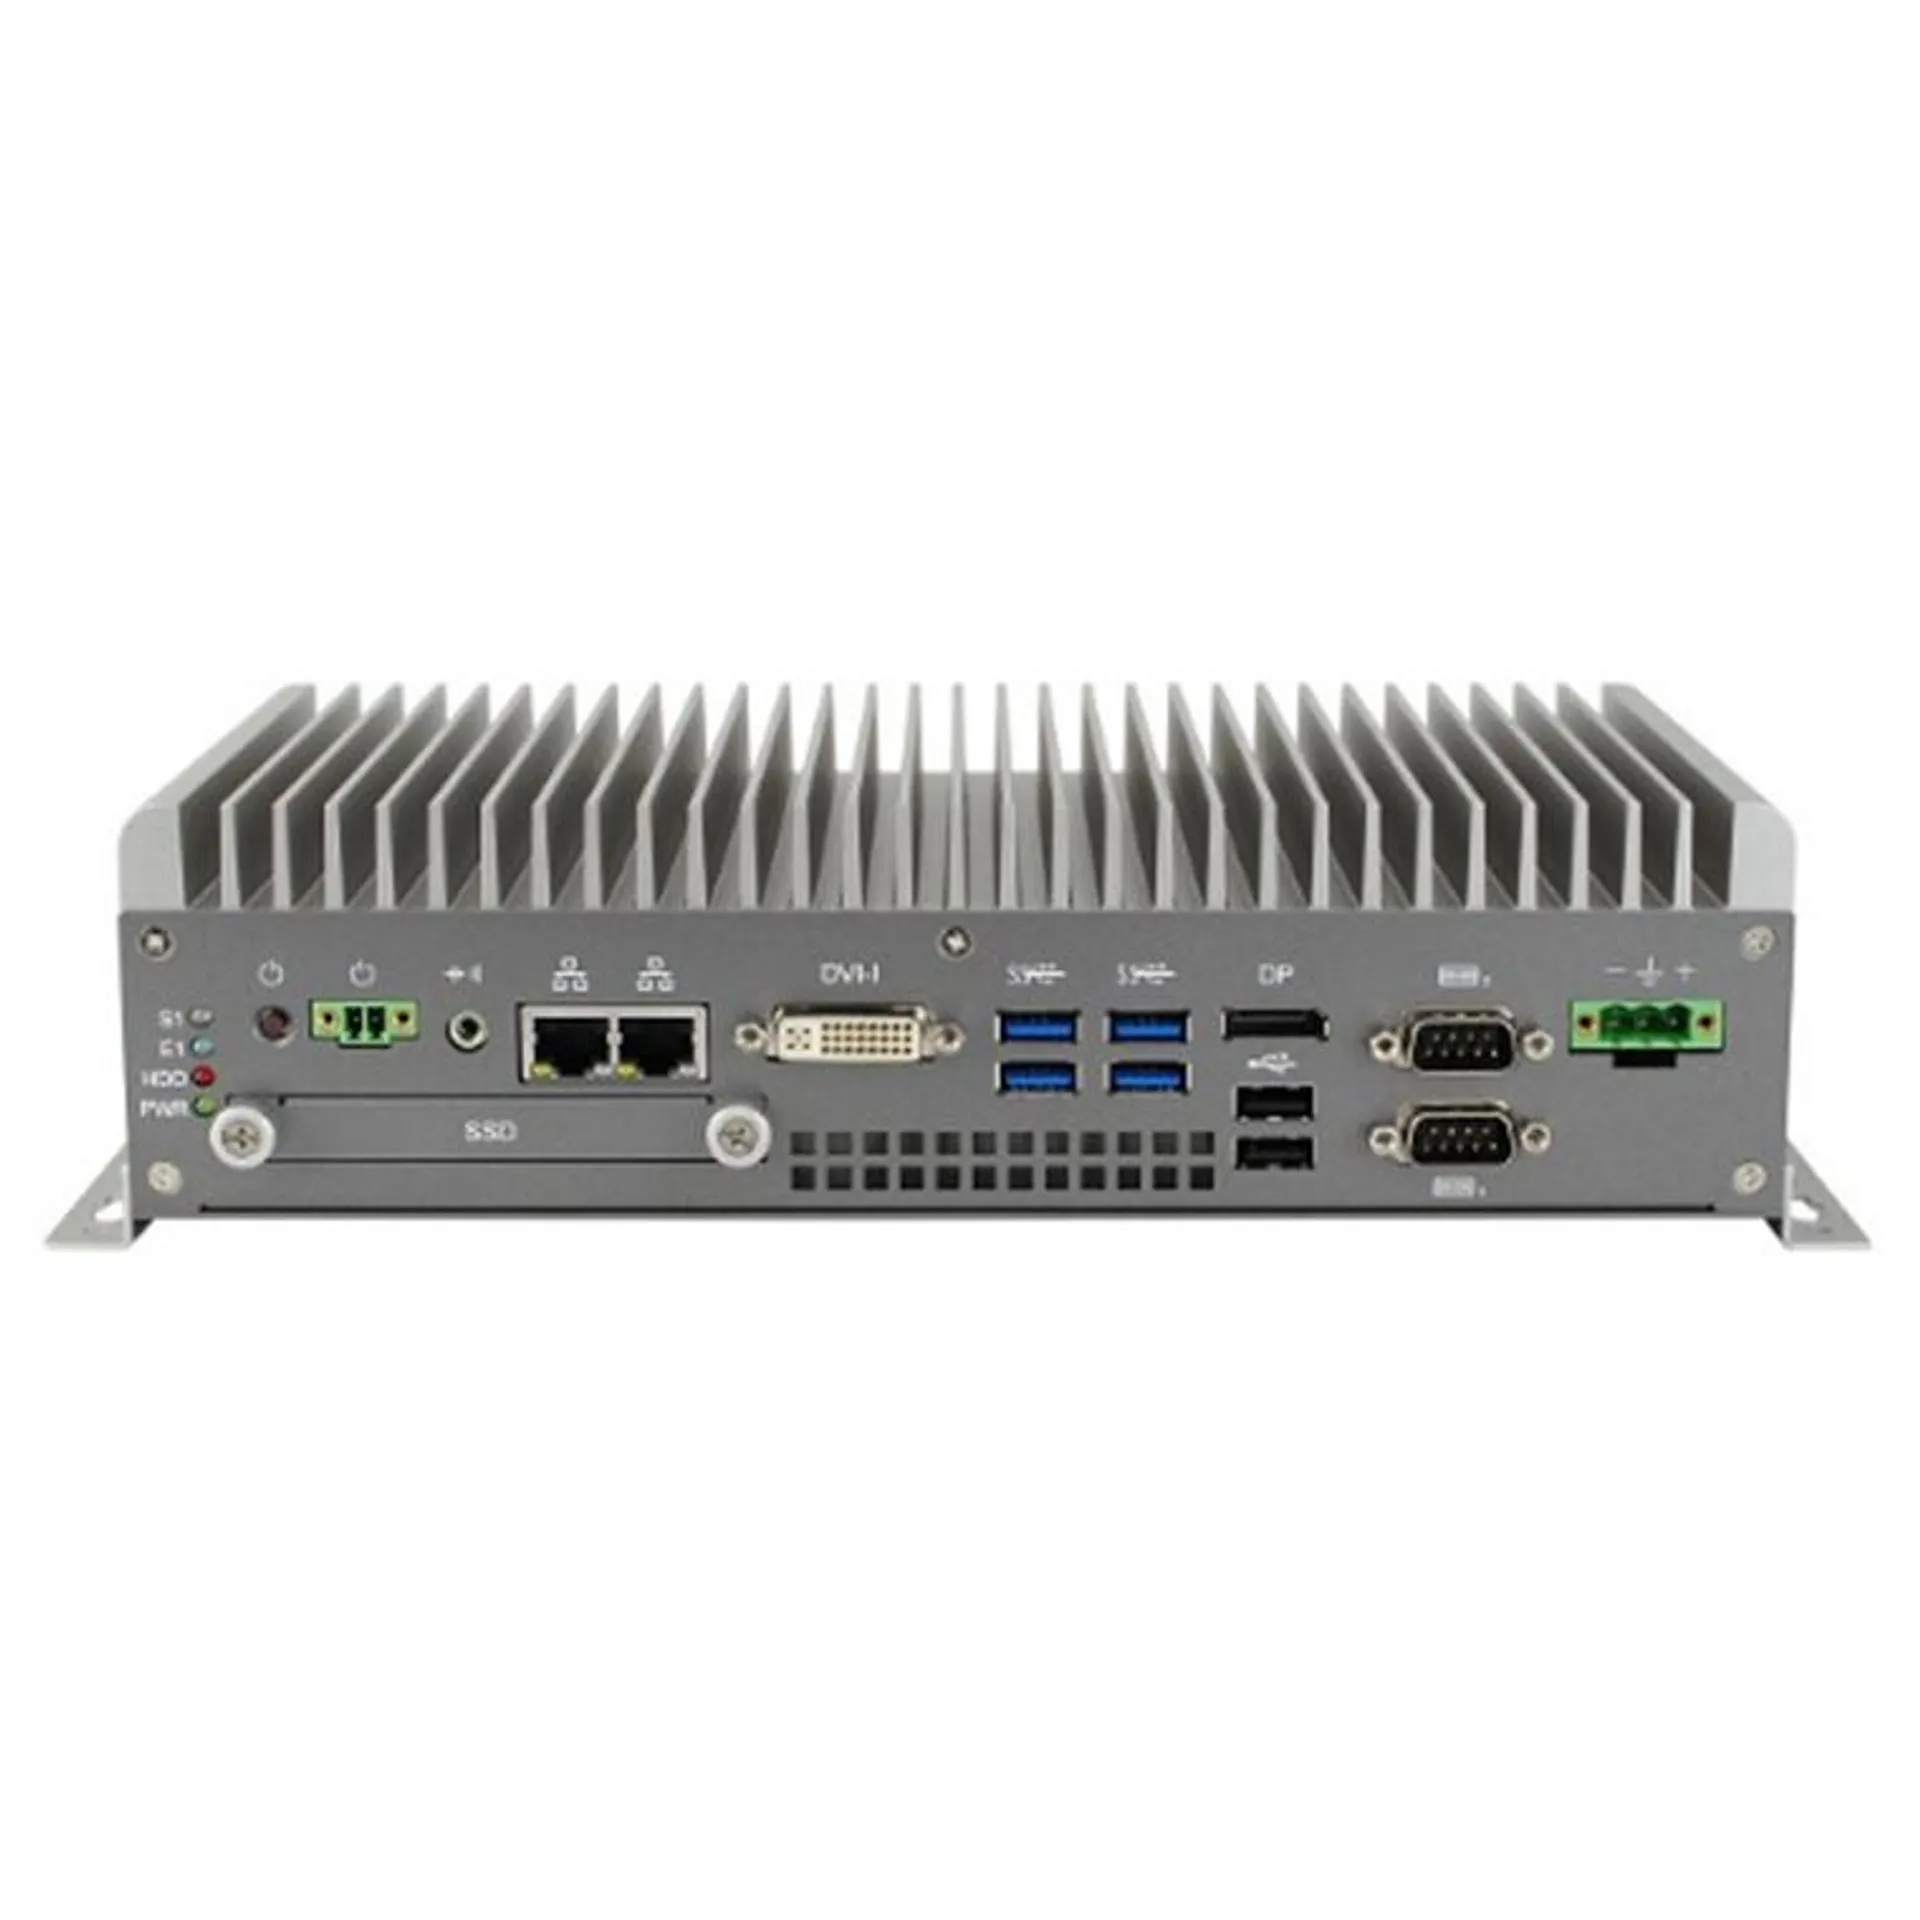 iBASE Fanless wide temp solution AMS300M i7-7700T, 16G/512GB X2, with WIFI, DVI x1, DP x1, USB x6, RJ45 x3. 180W/24V Power adaptor